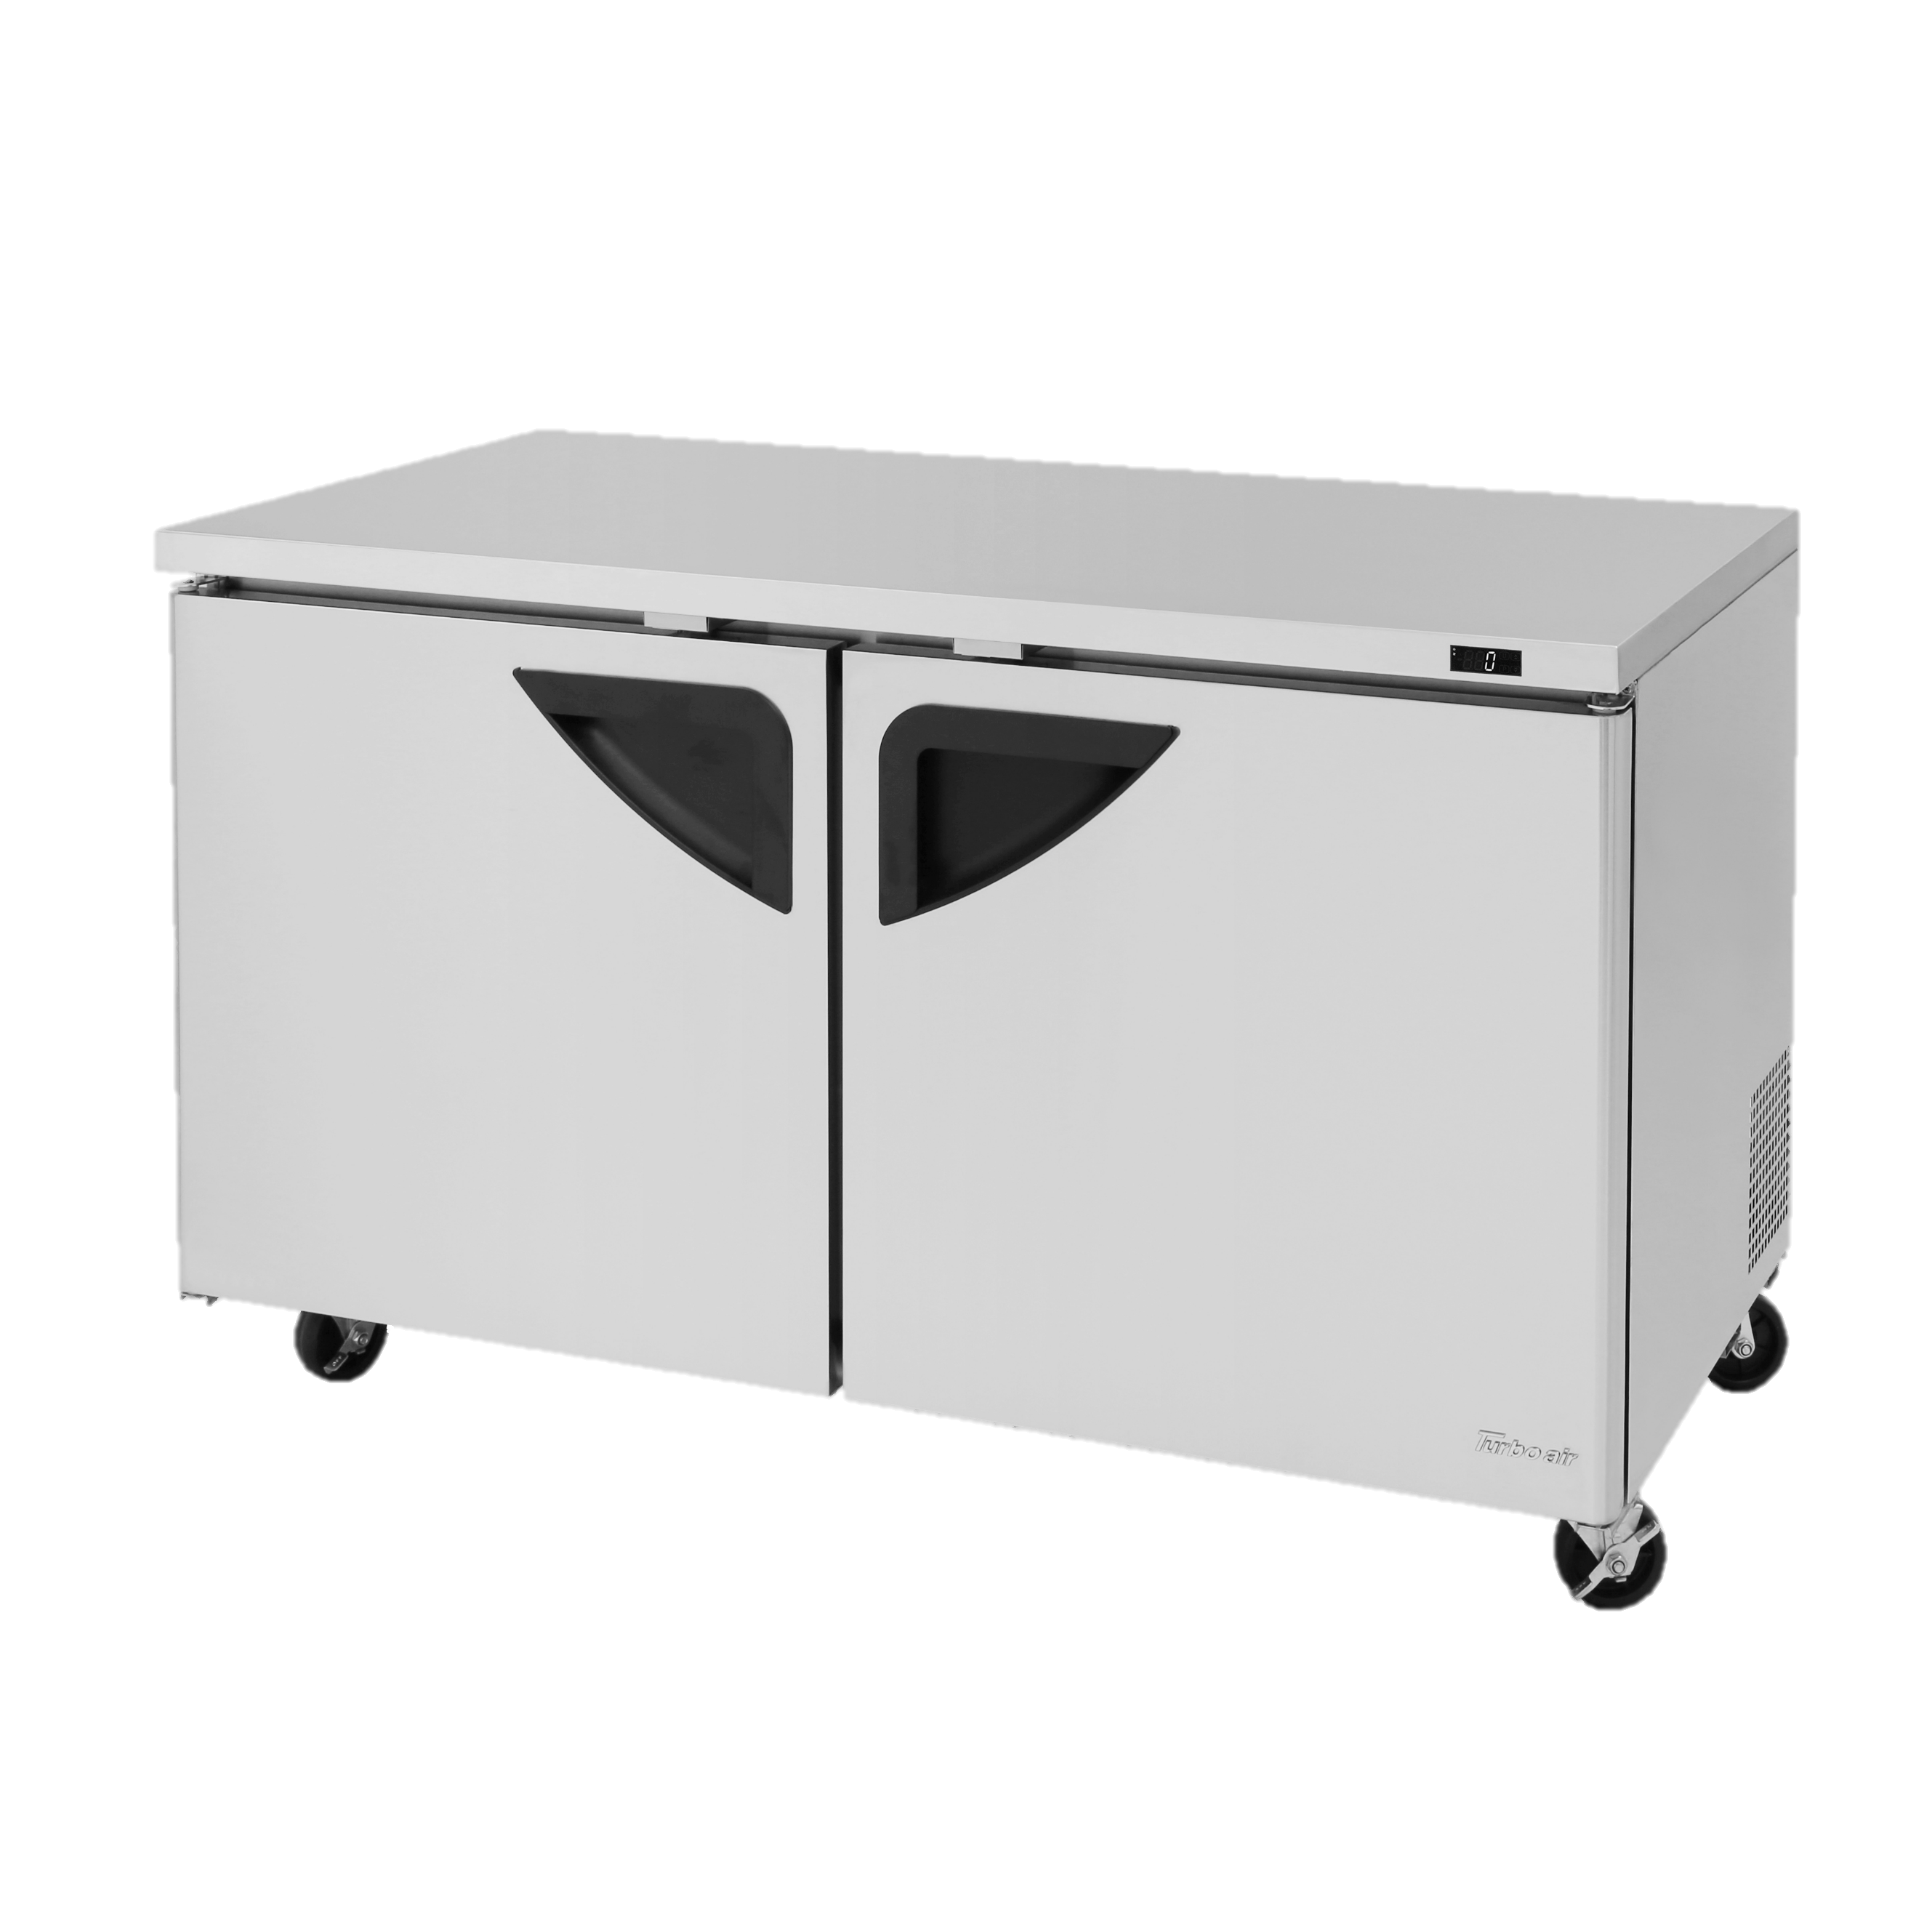 superior-equipment-supply - Turbo Air - Turbo Air Two-Section 60.25" Undercounter Freezer